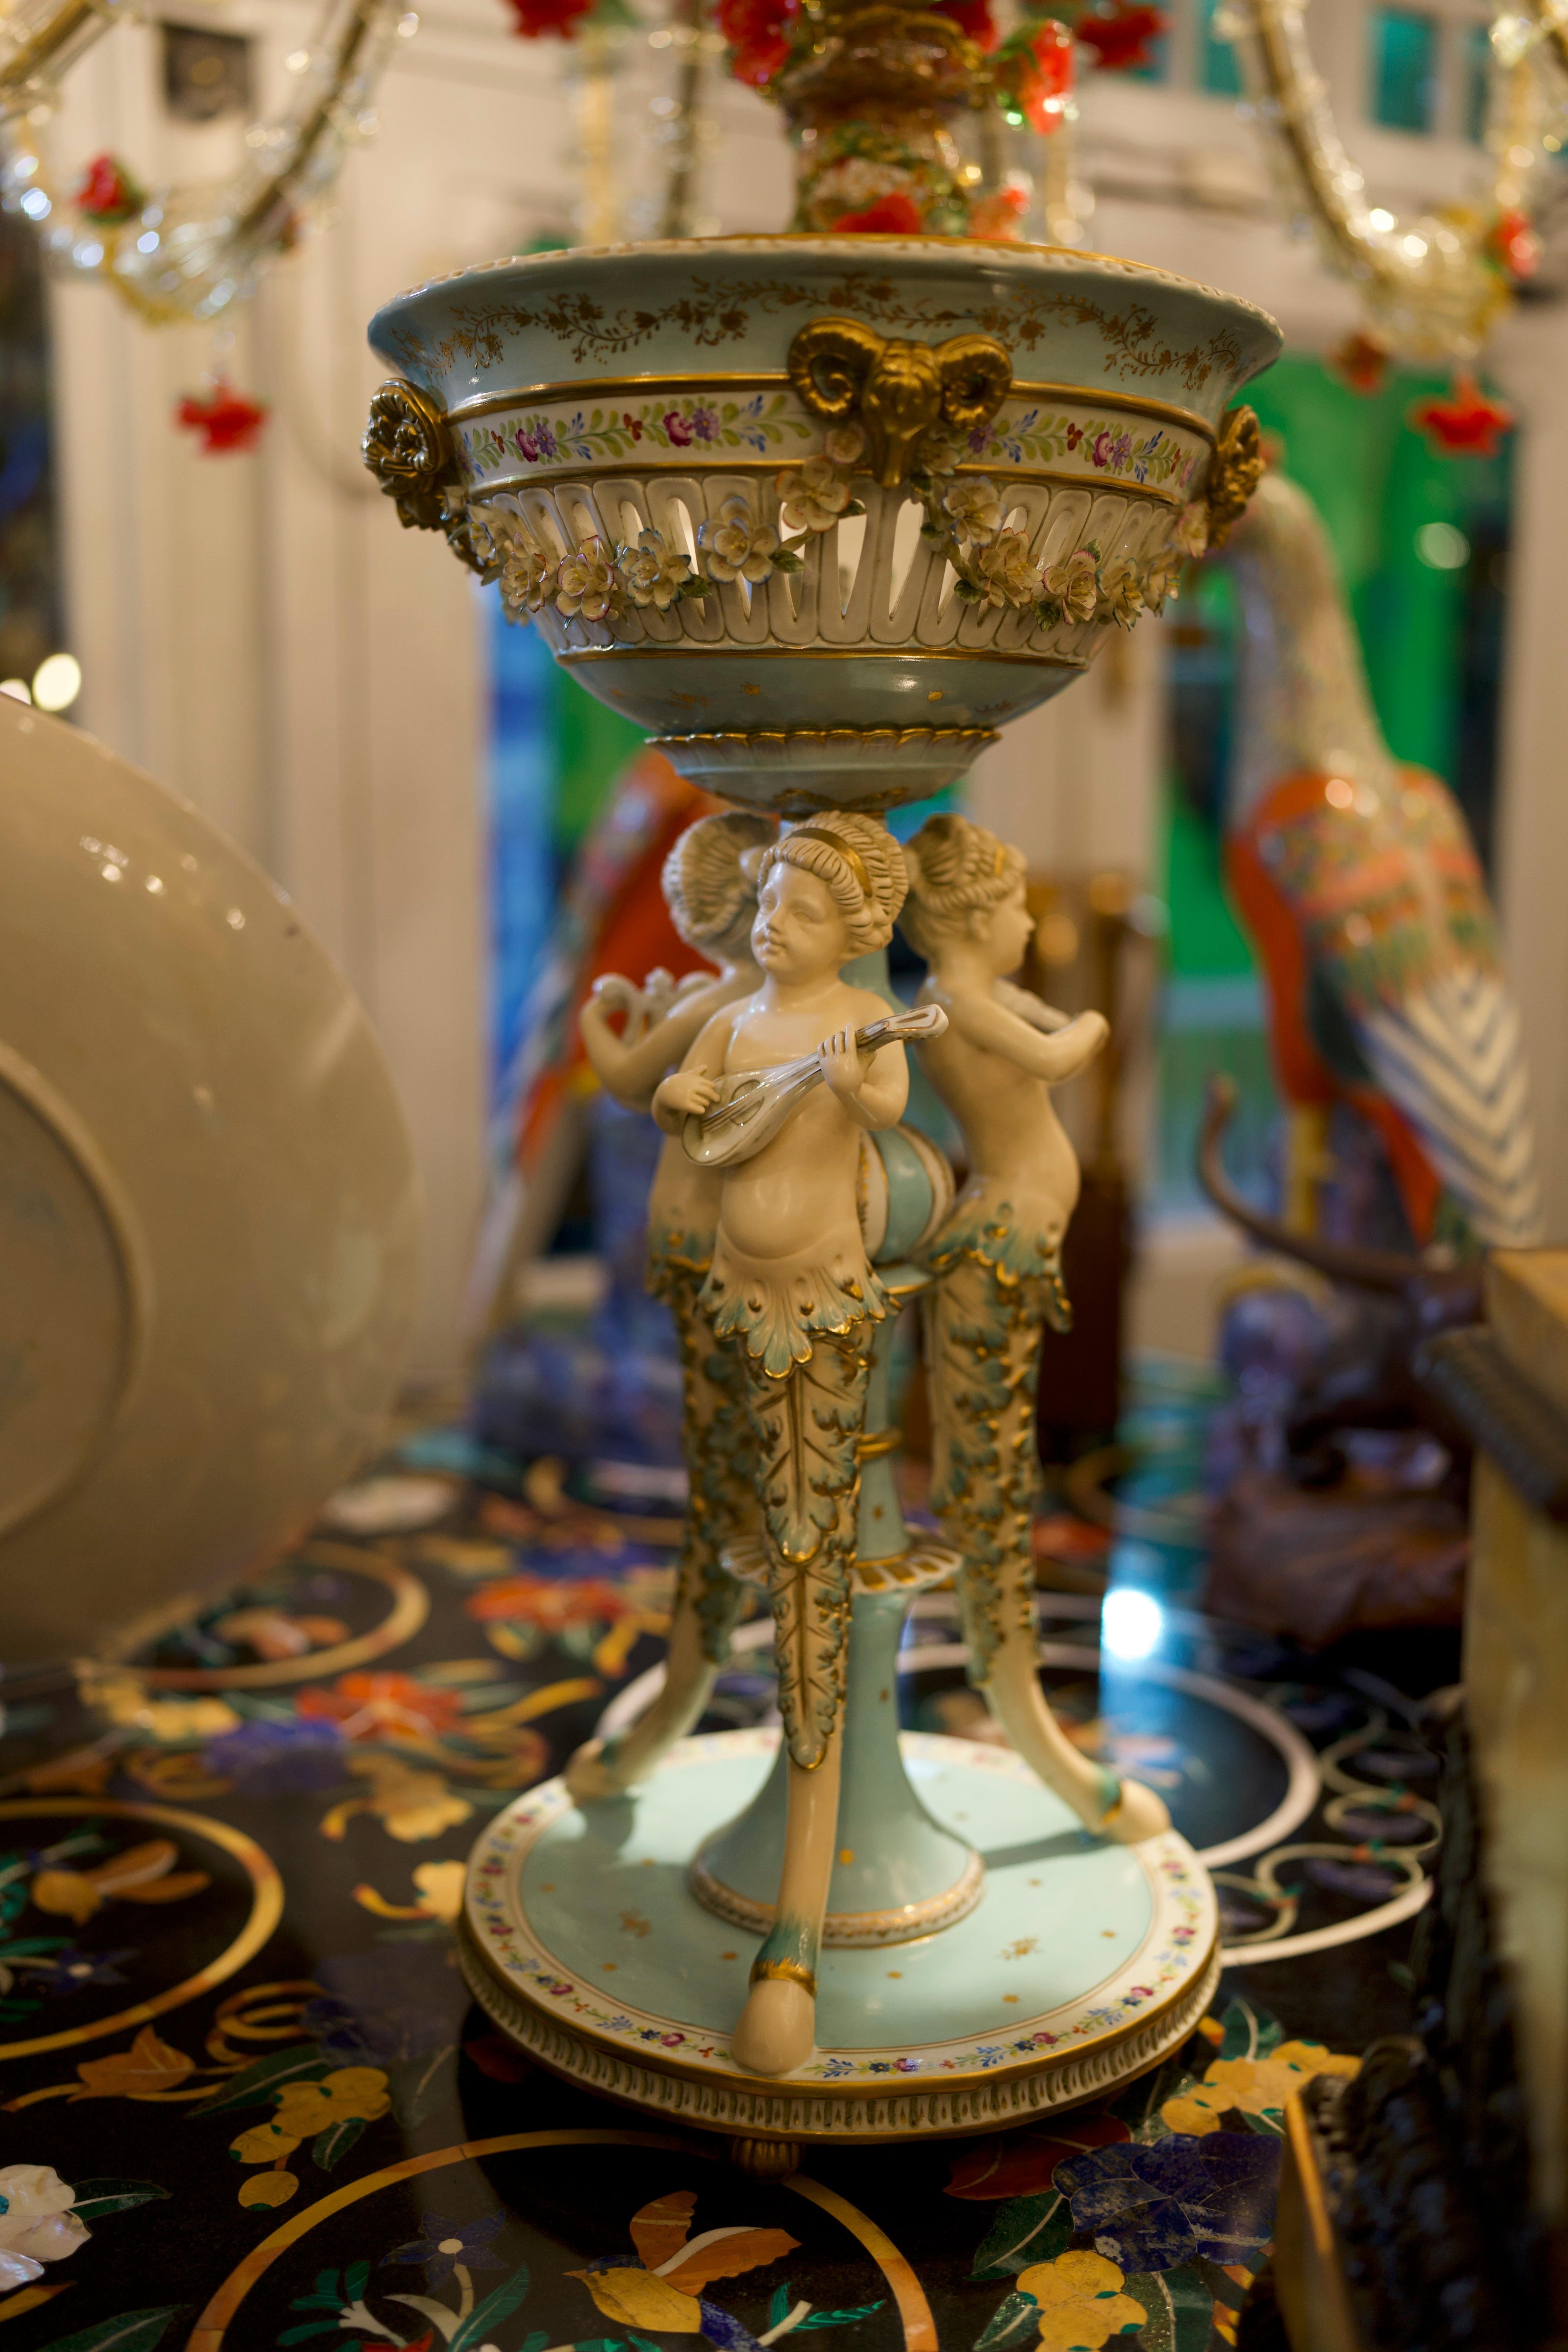 A beautiful 19th century Minton Majolica figural pedestal planter.

A Minton England majolica jardiniere featuring three faun footed cherubian figures serving as pillars supporting a reticulated planter top. Each winged cherub connected with a